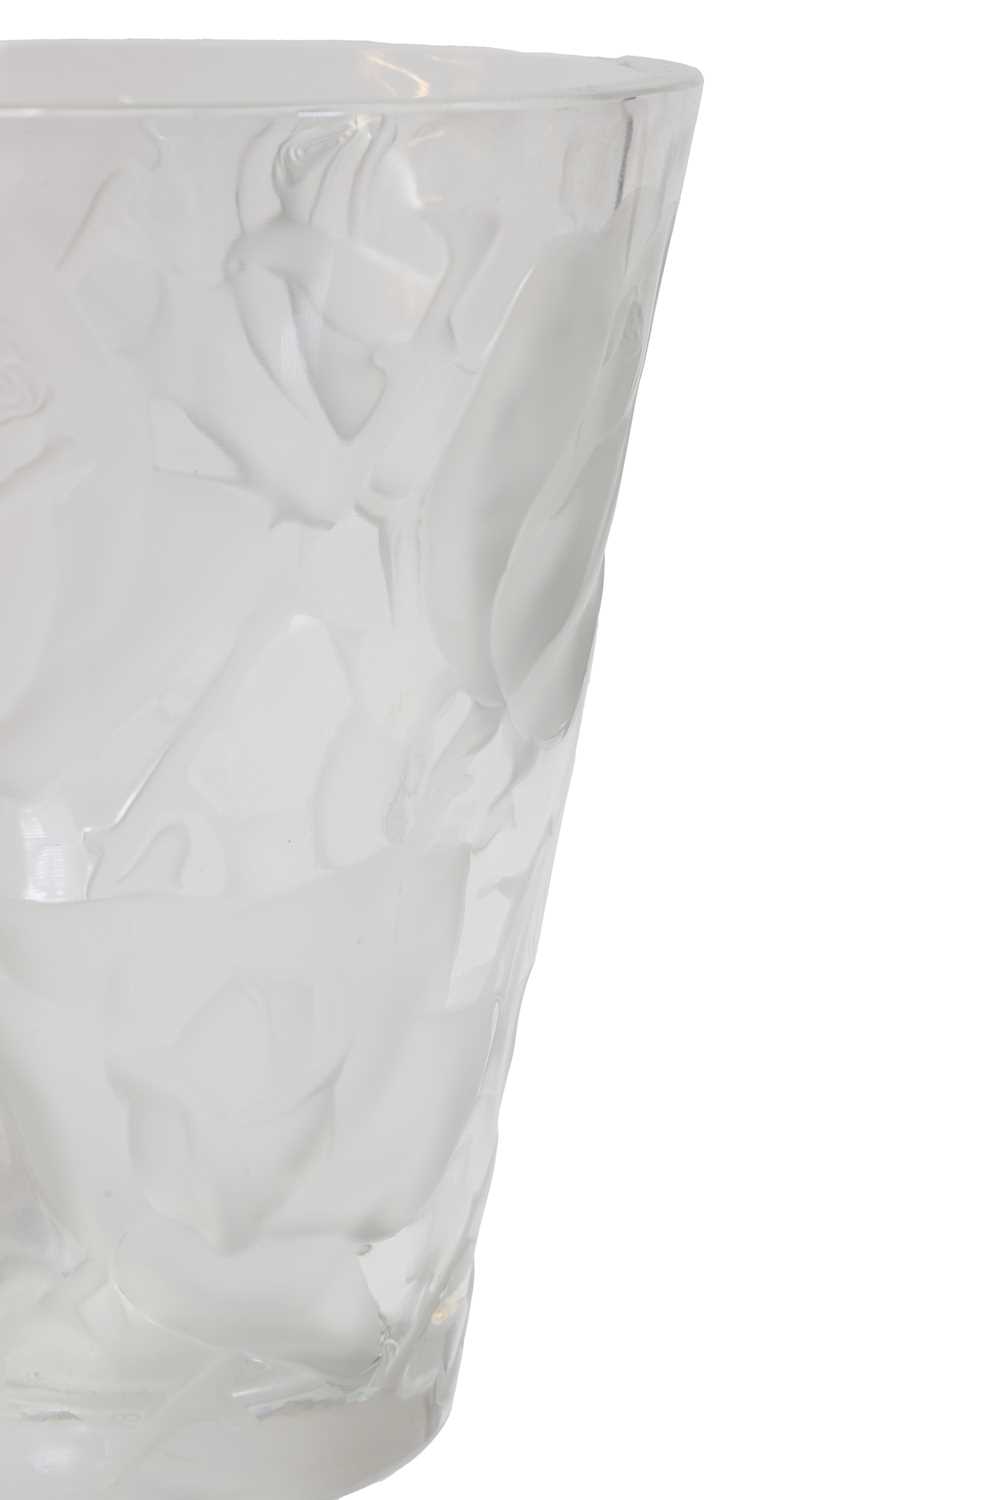 A Lalique 'Ispahan' glass vase, - Image 2 of 4